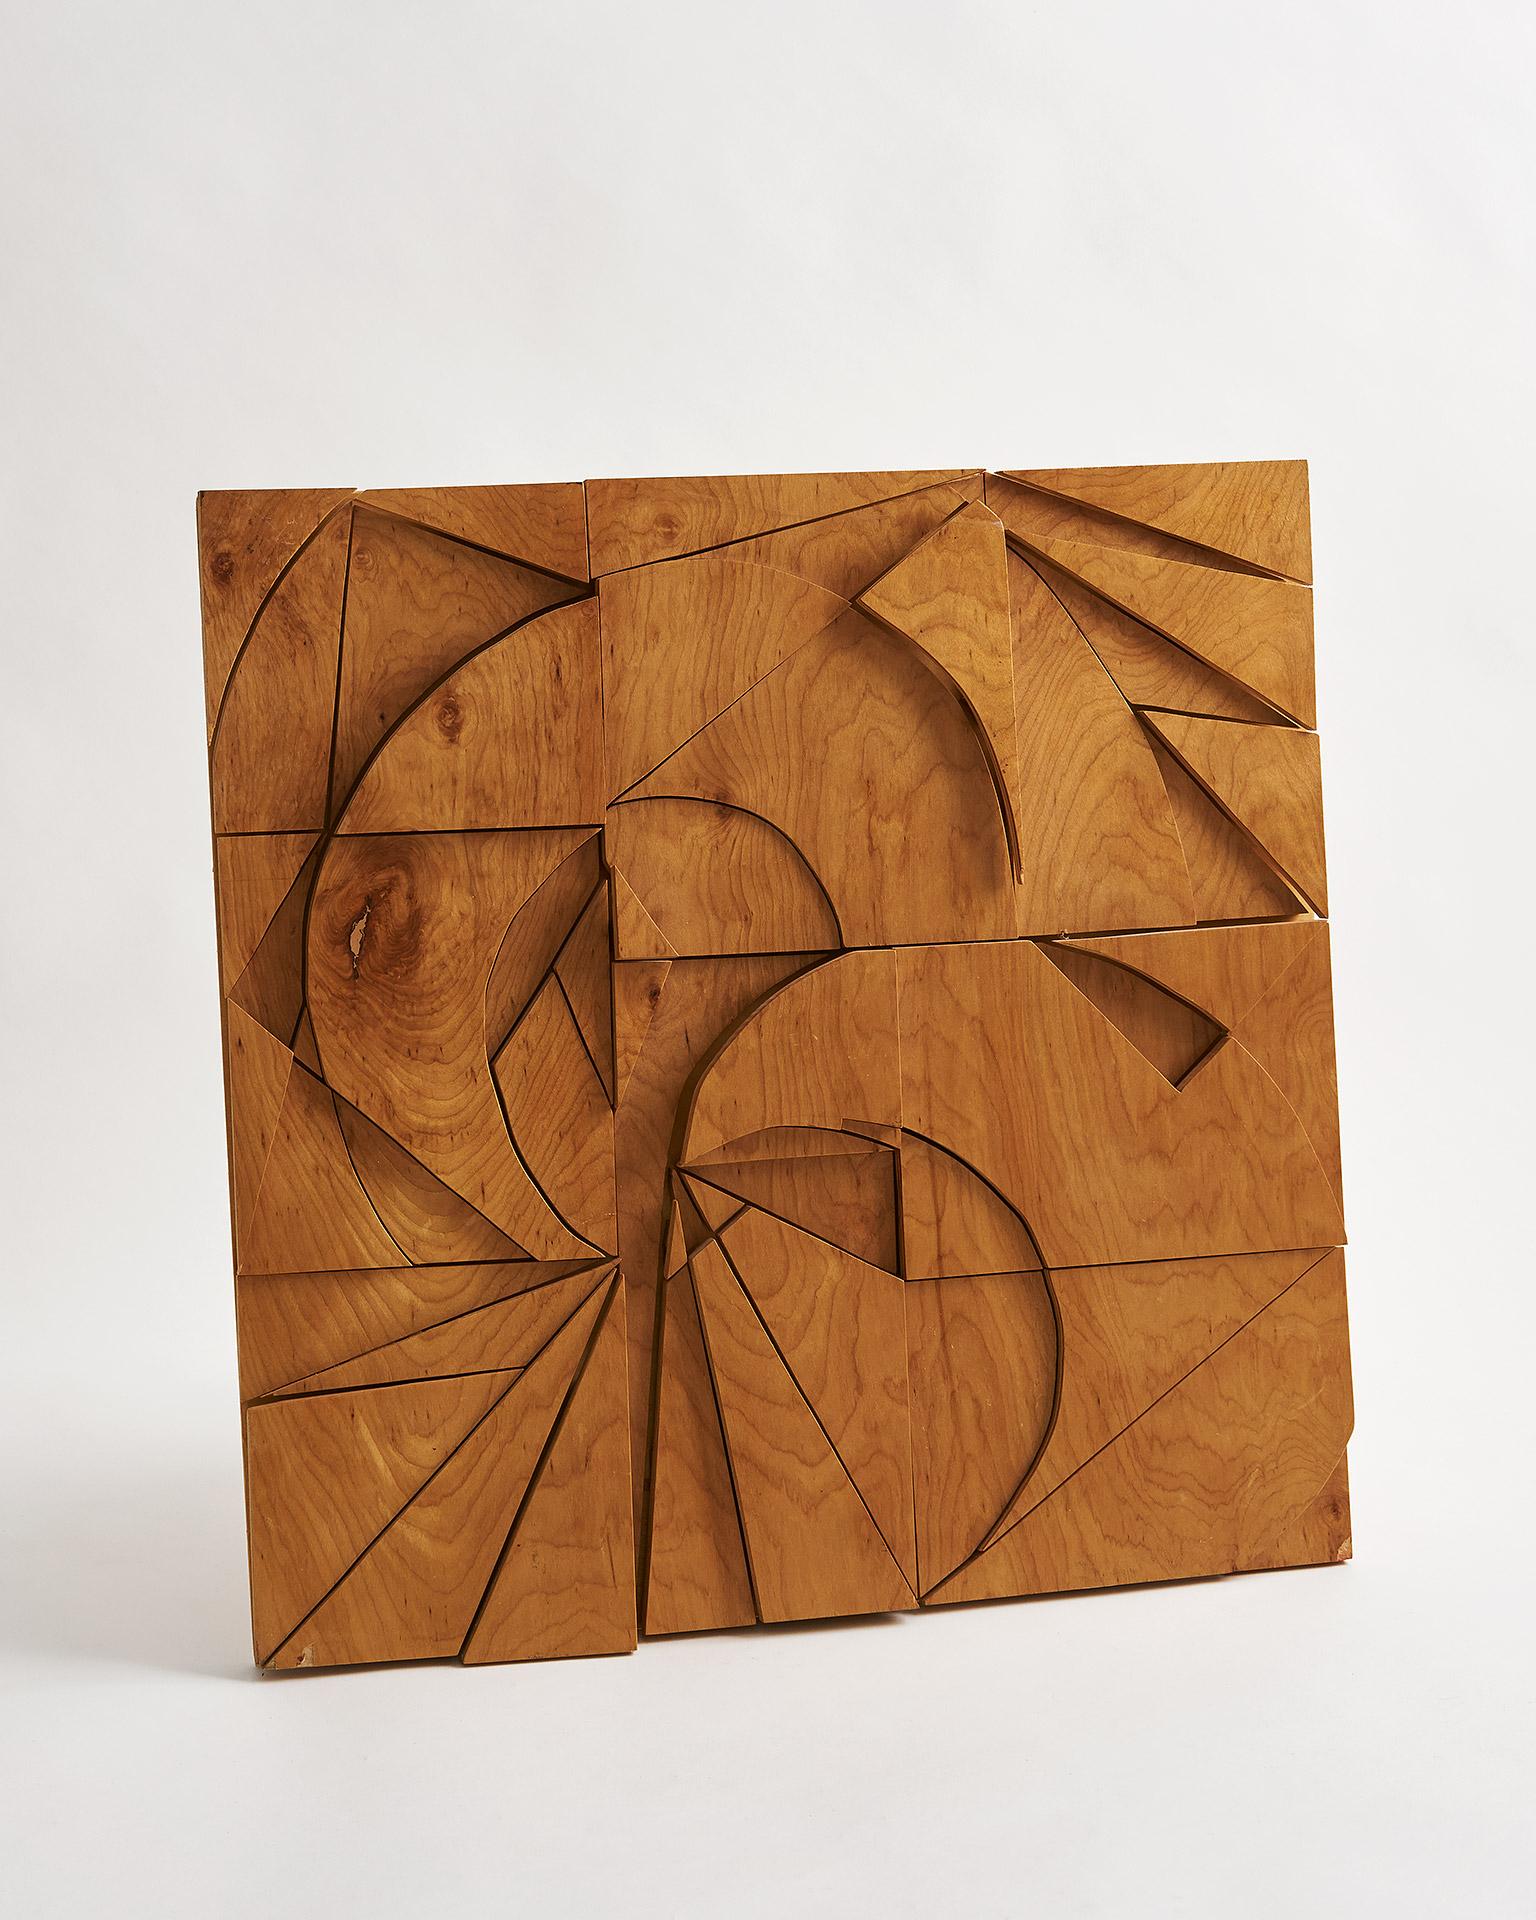 Vintage Brutalist layered geometric woodcut wall art with curved and diagonal lines. A unique wall sculpture that showcases dynamic woodworking. In very good vintage condition, shows age-appropriate wear.

This item is part of a vintage collection